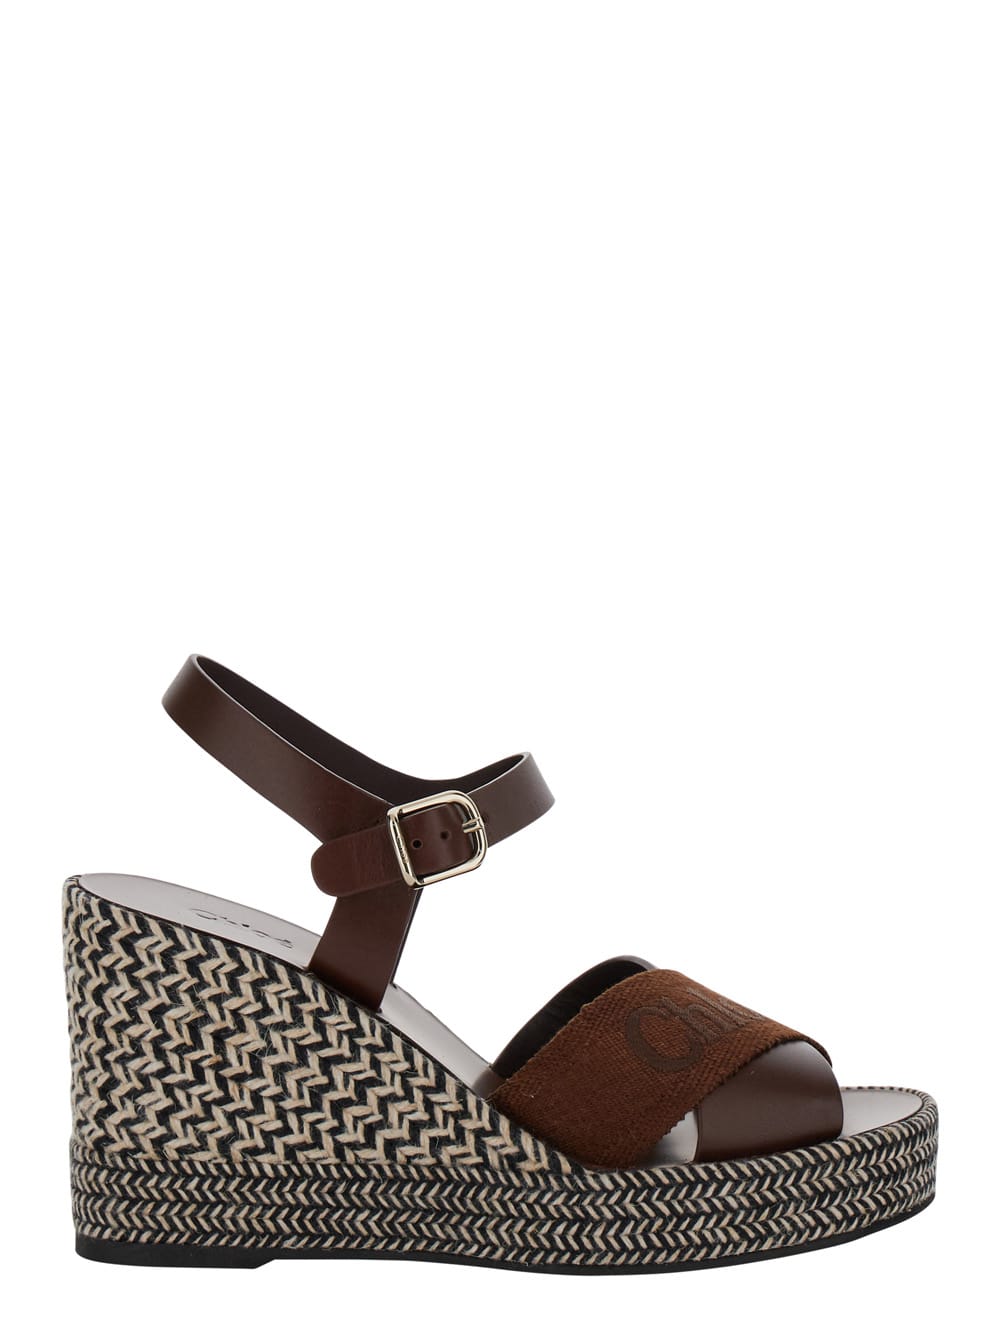 Chloé Espadrillas Sandals With Wedge In Leather And Jute